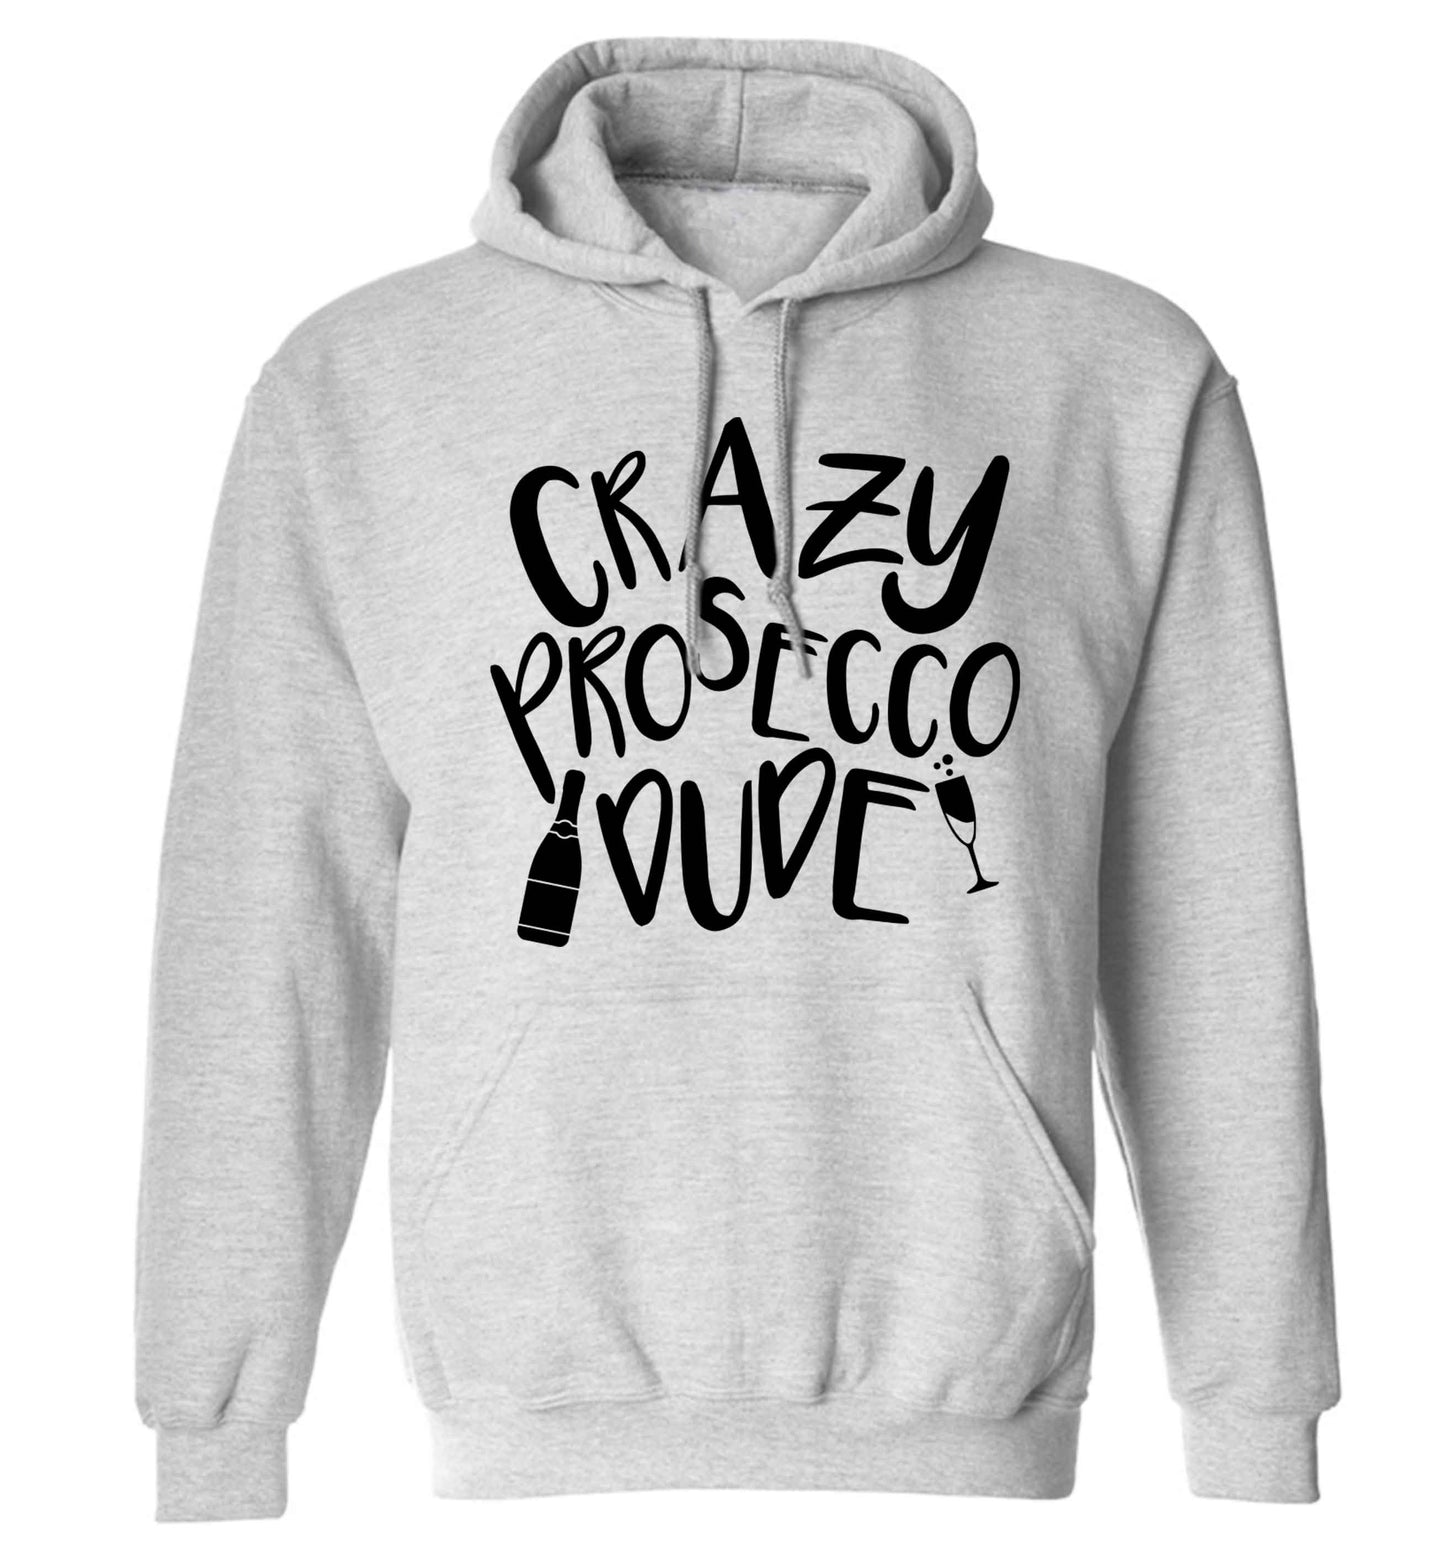 Crazy prosecco dude adults unisex grey hoodie 2XL